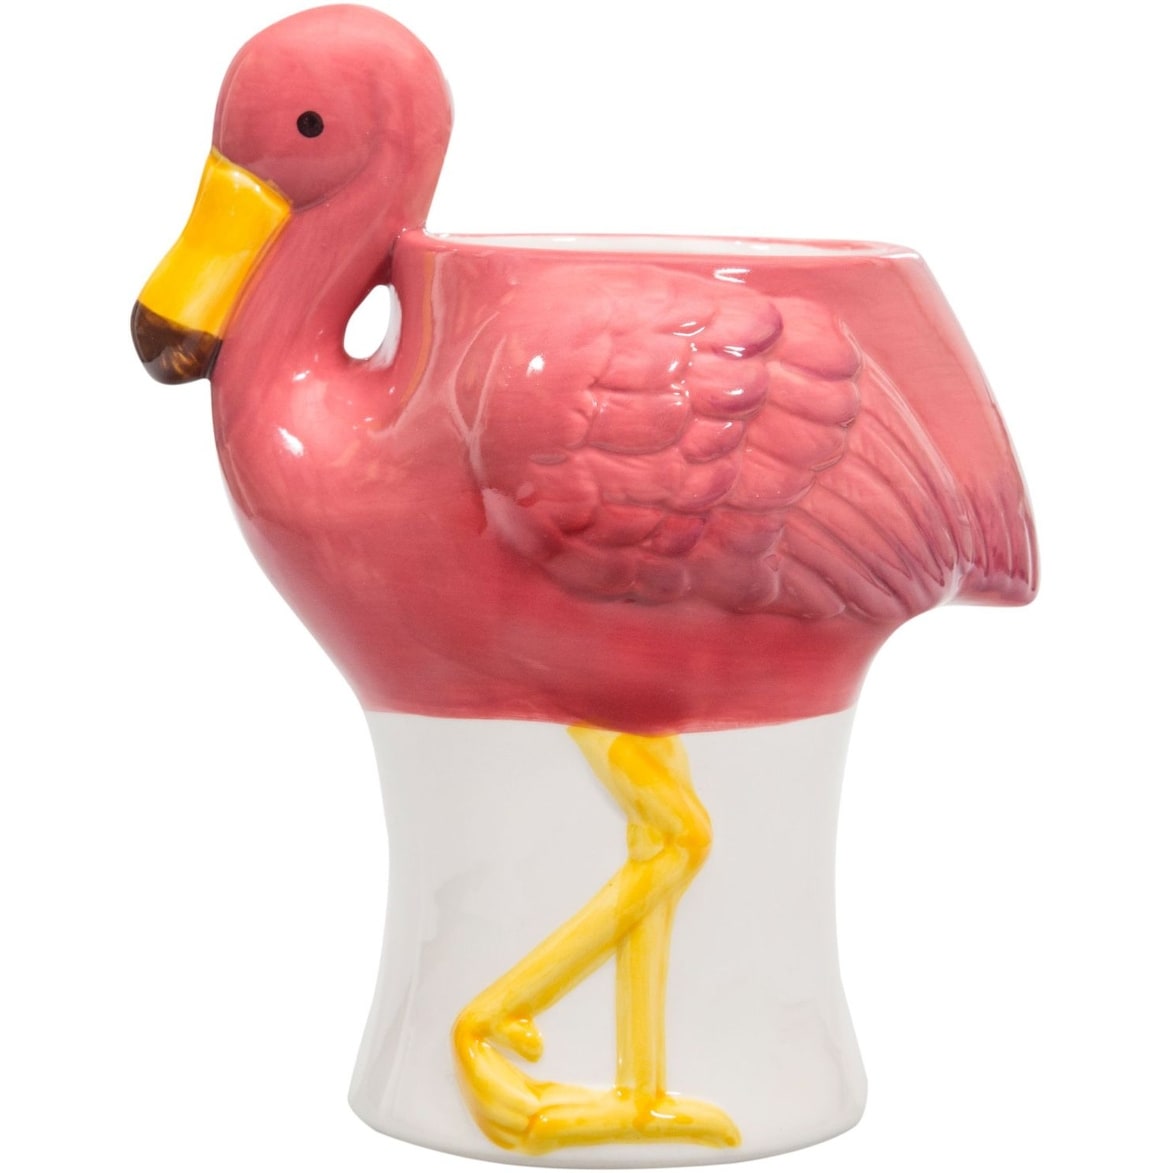 https://ak1.ostkcdn.com/images/products/is/images/direct/a008a7aa40e2fa6fa43c4c7bfdbf706ba54e34a2/Pretty-in-Pink-Flamingo-Utensil-Crock-Kitchen-Counter-Decor-Ceramic.jpg